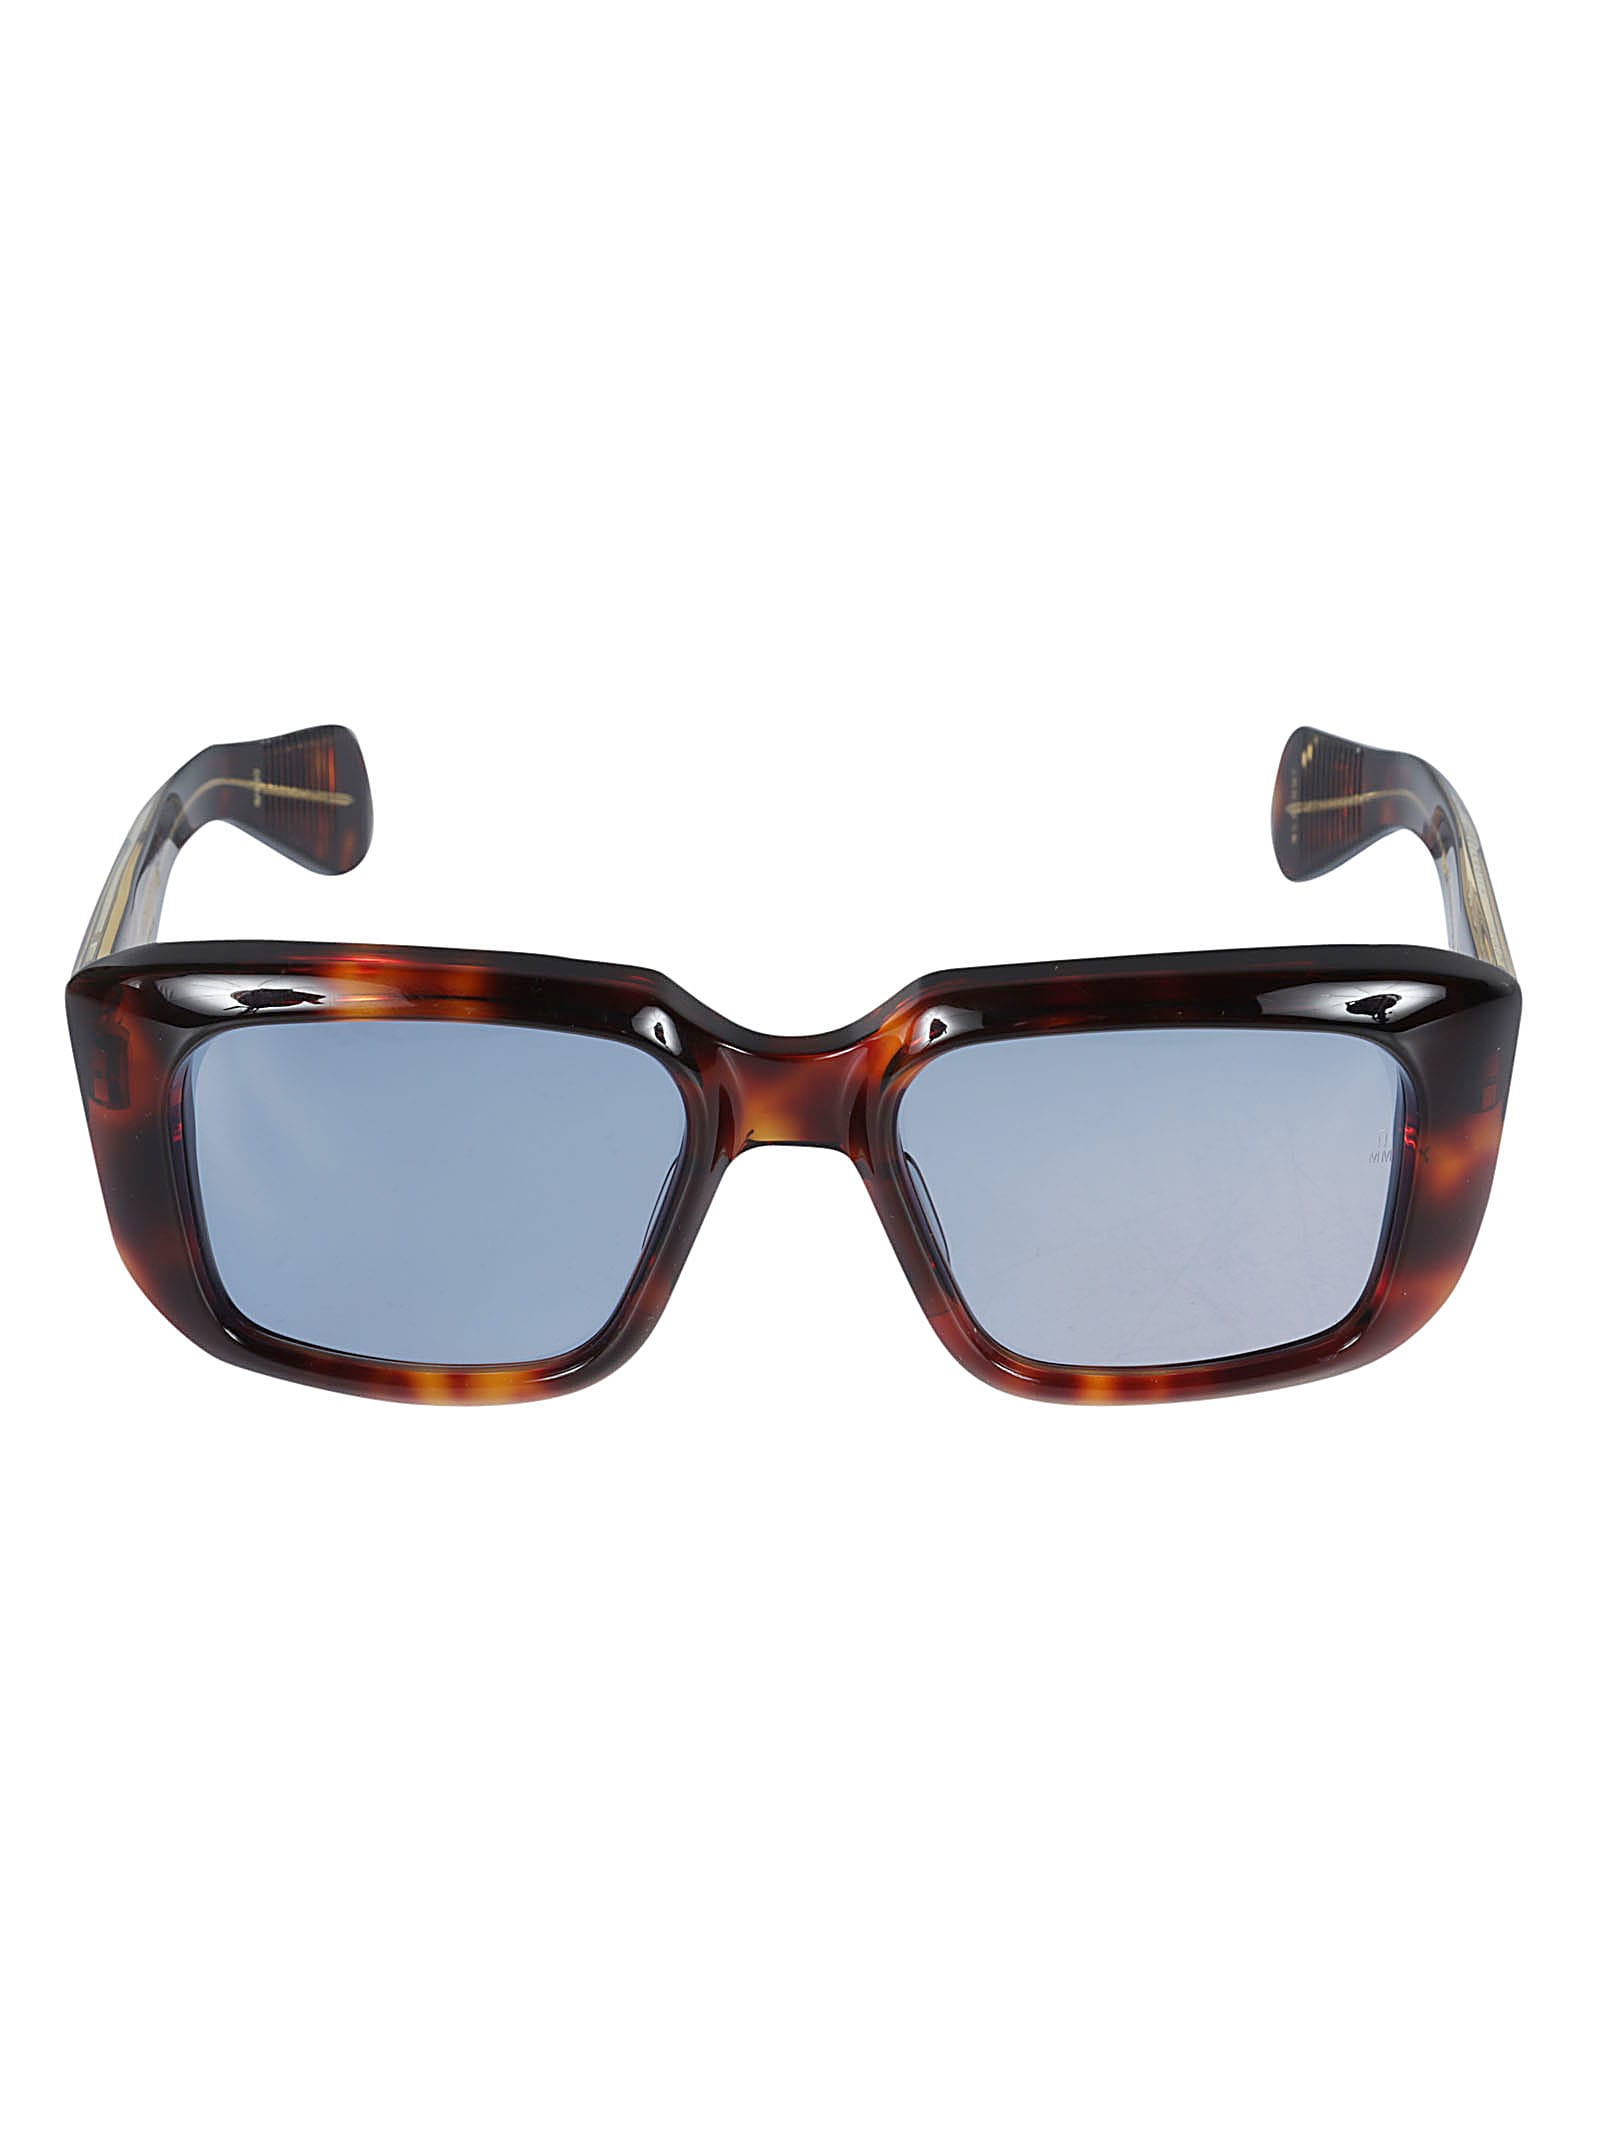 Jacques Marie Mage Flame Effect Sunglasses